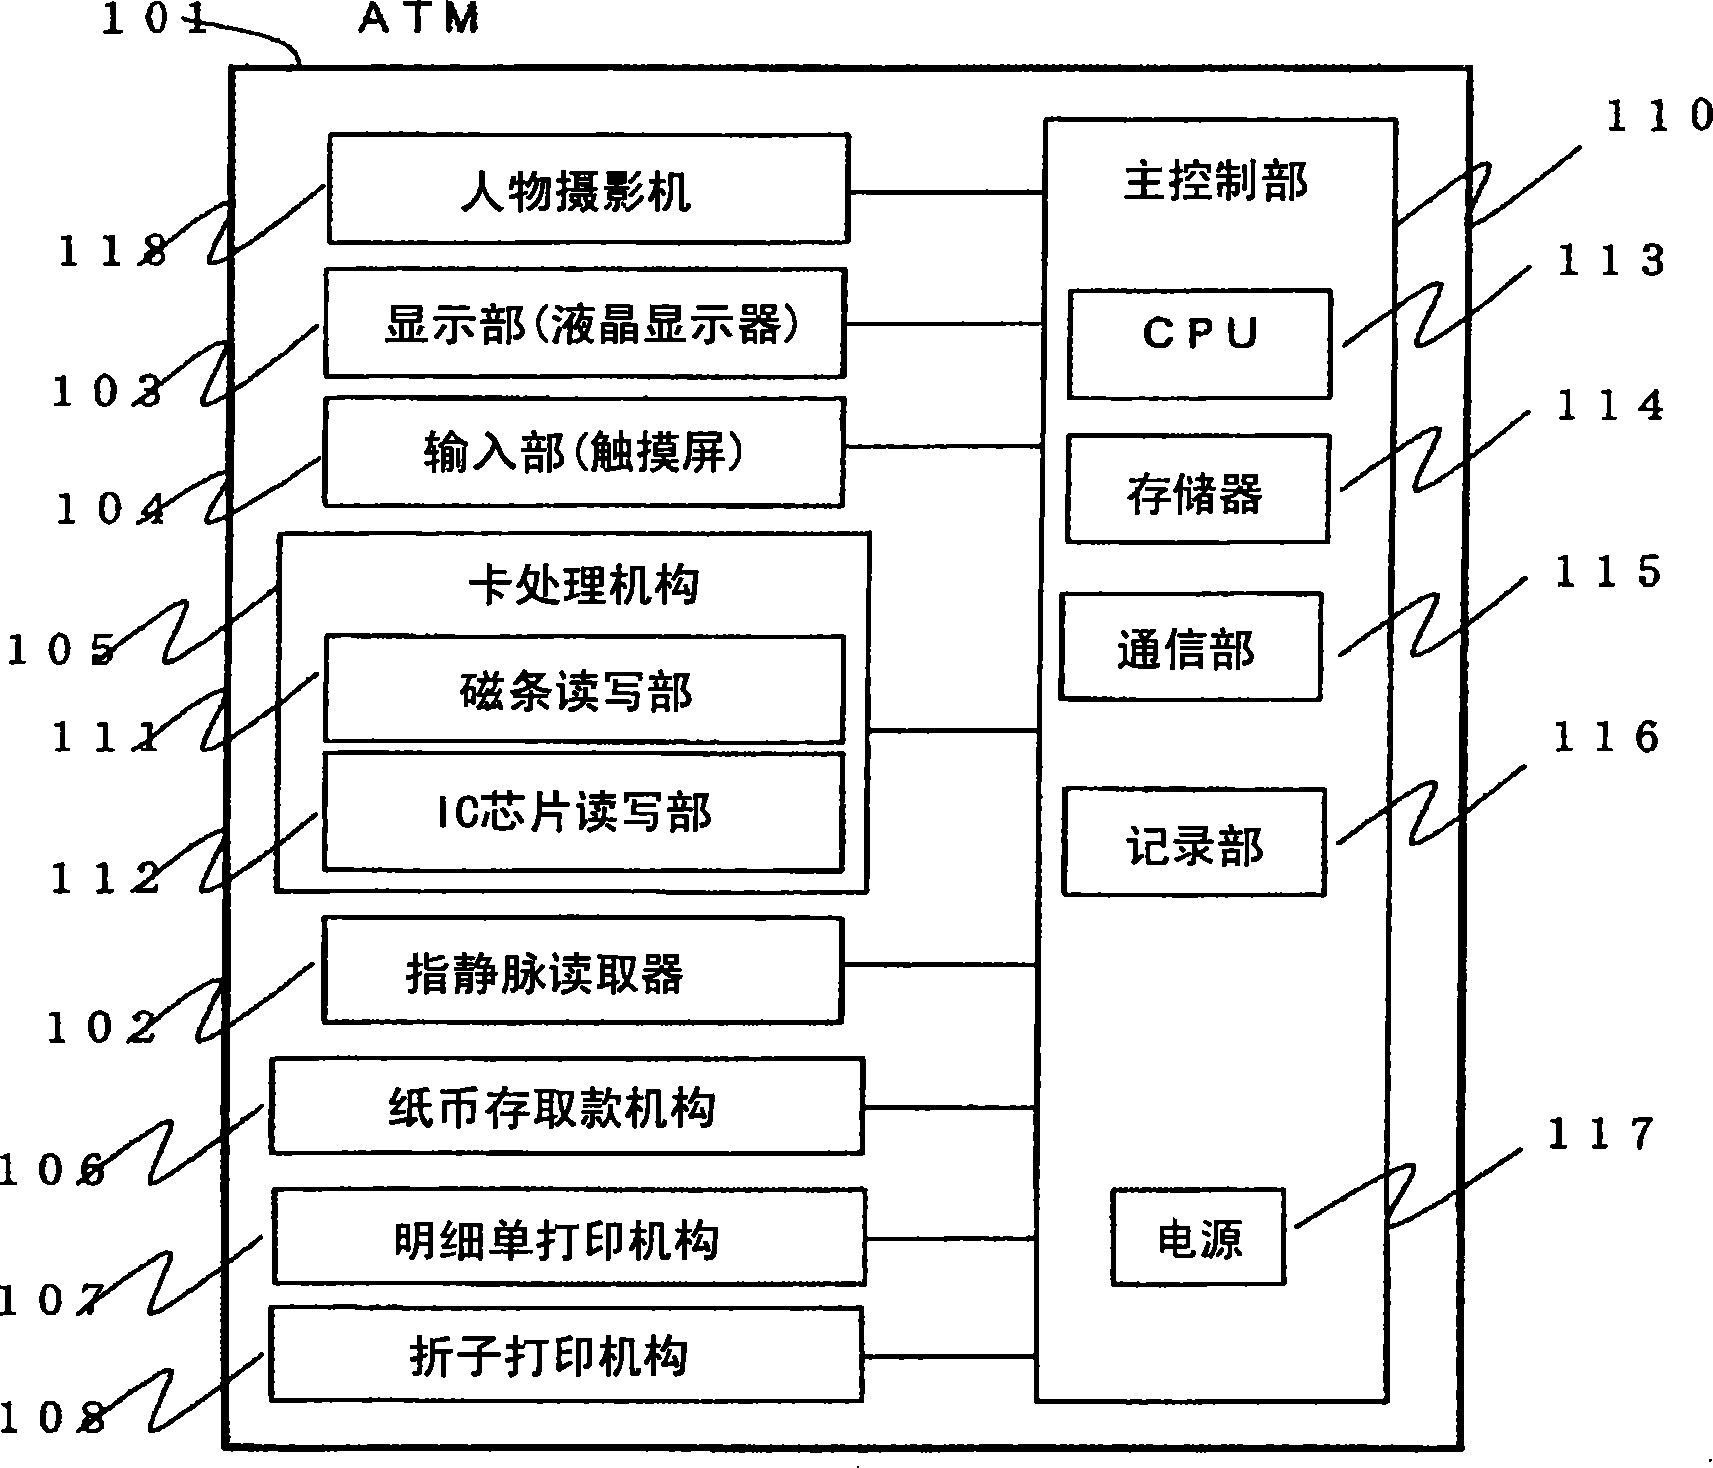 Biometric authentication processing system